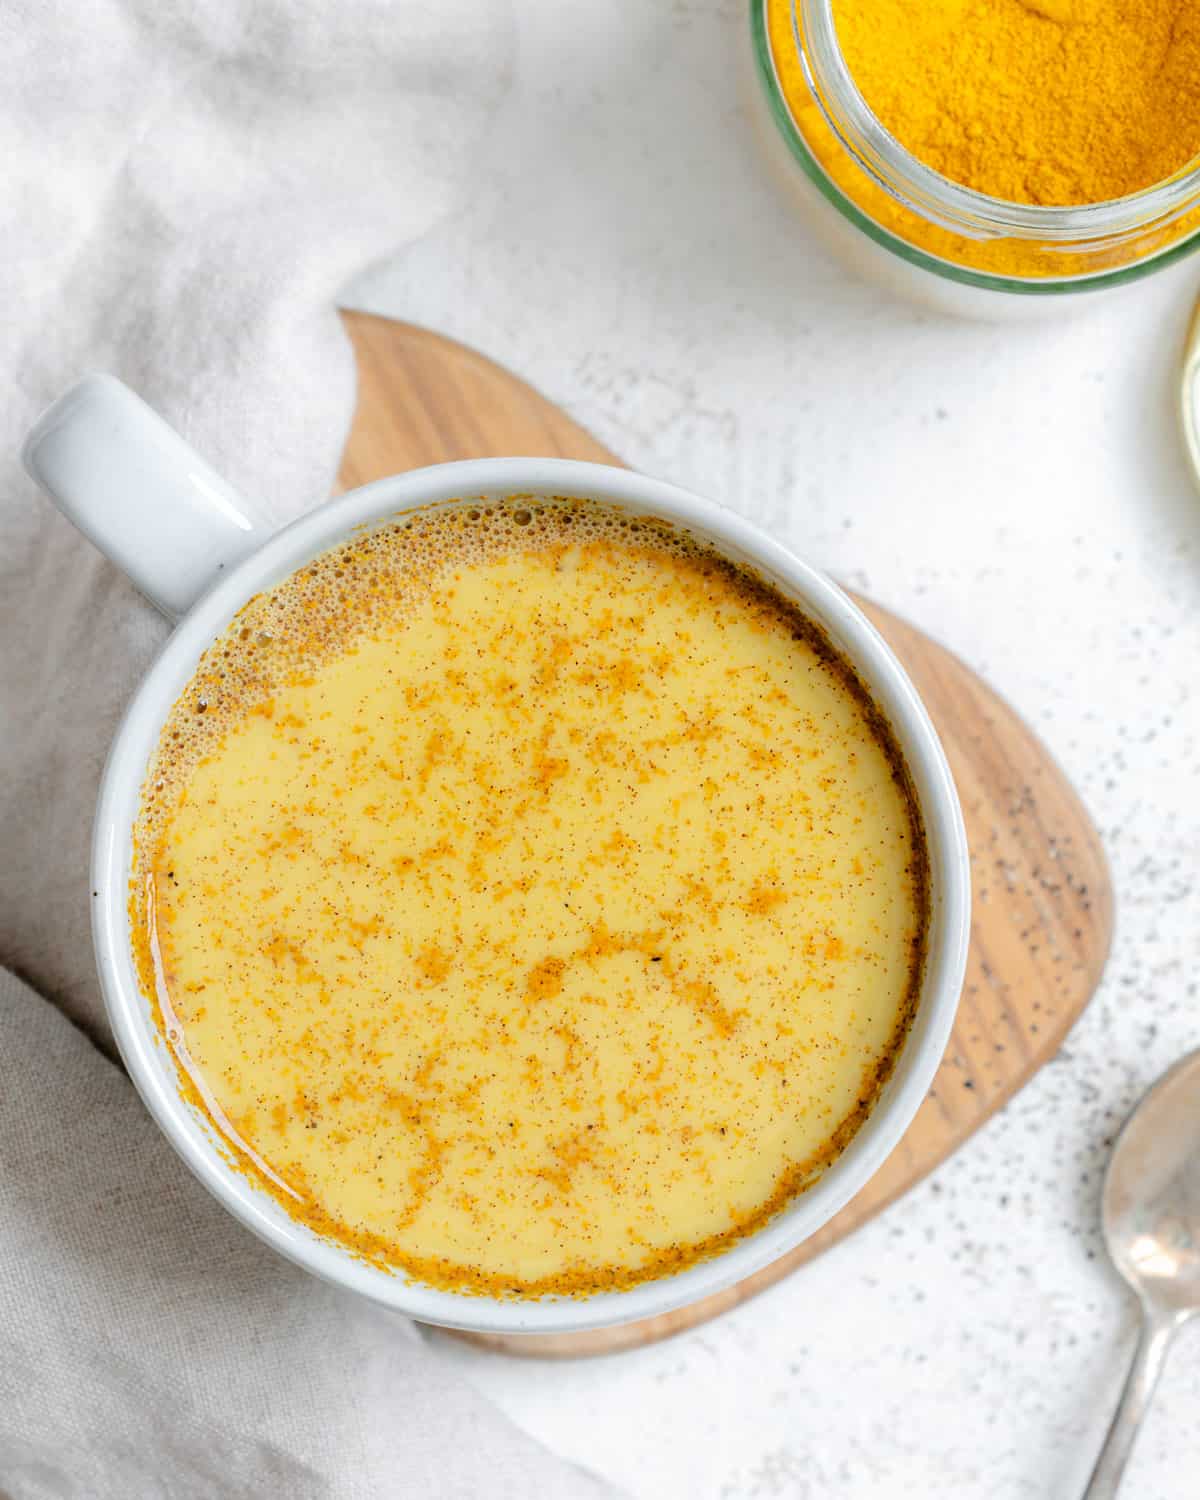 completed Turmeric Golden Milk [Haldi Doodh] in a white cup against a white background